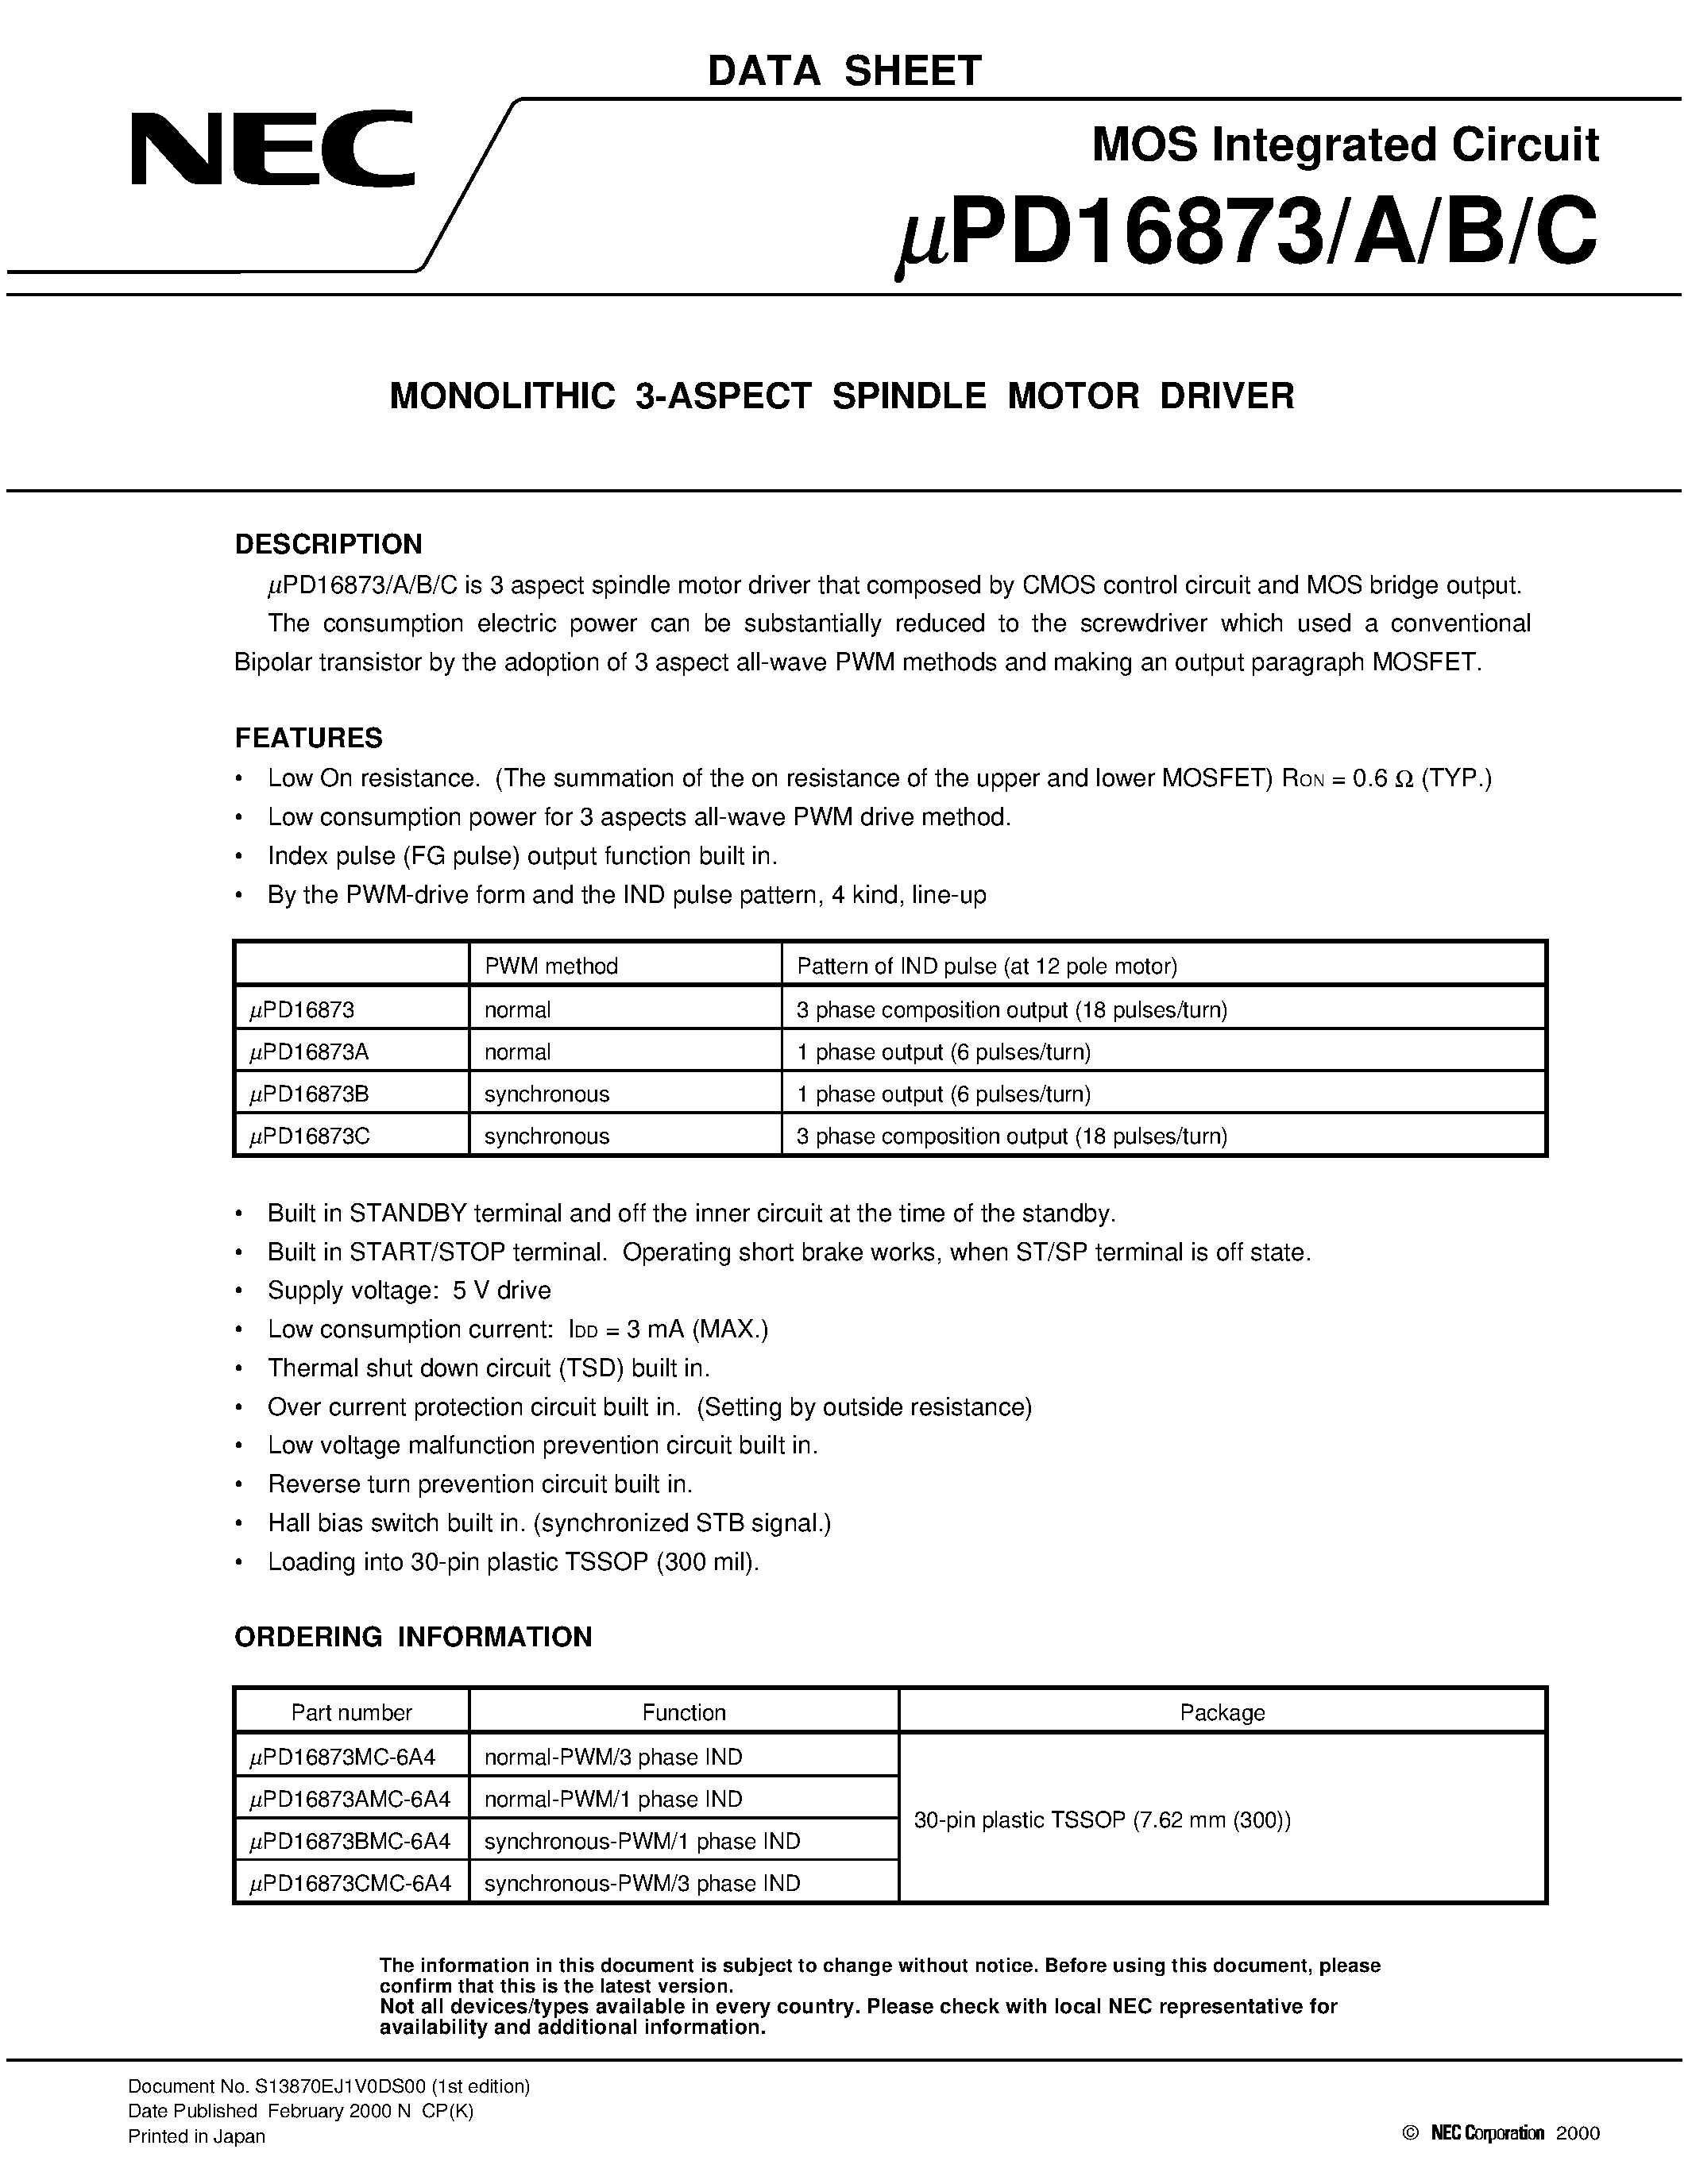 Datasheet UPD16873A - MONOLITHIC 3-ASPECT SPINDLE MOTOR DRIVER page 1